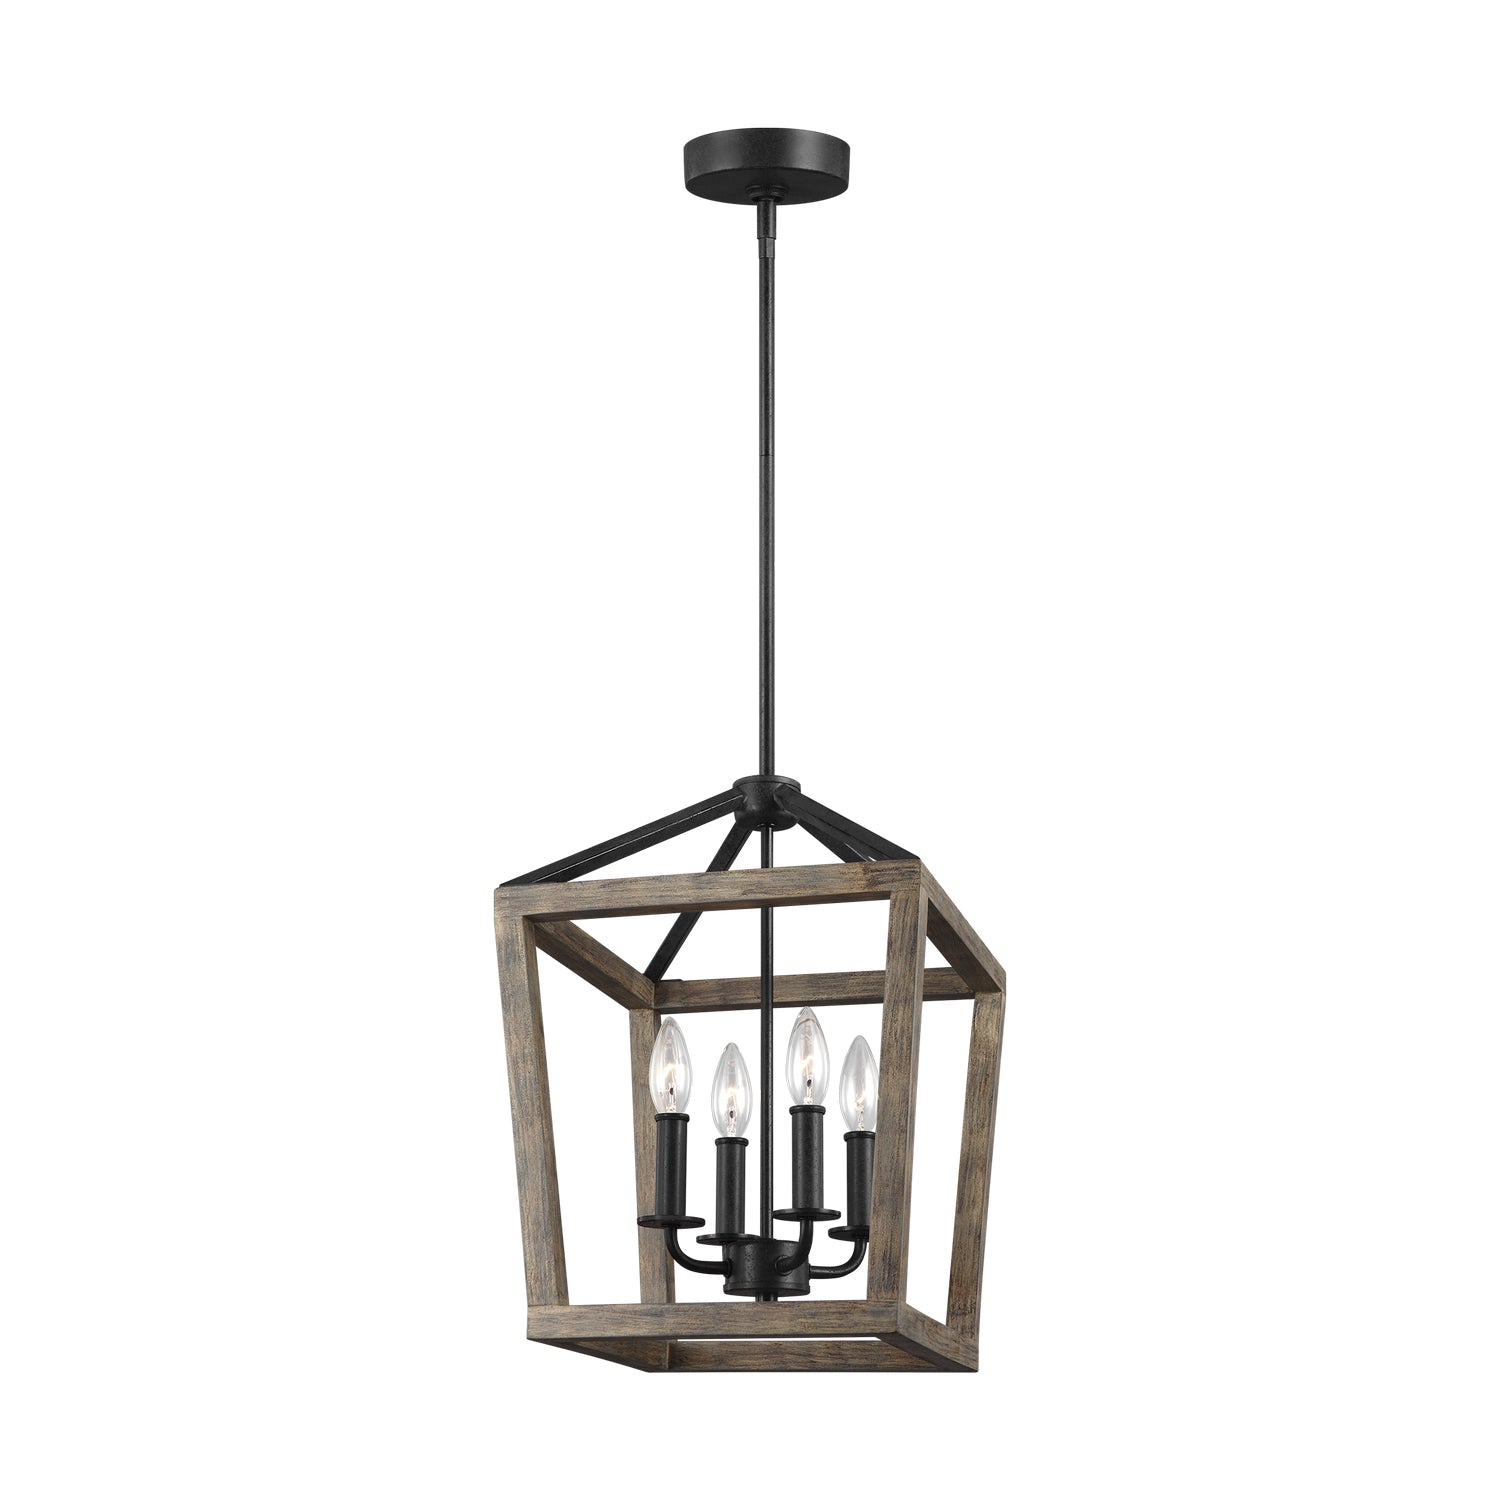 Visual Comfort Studio Canada - F3190/4WOW/AF - Four Light Chandelier - Gannet - Weathered Oak Wood / Antique Forged Iron